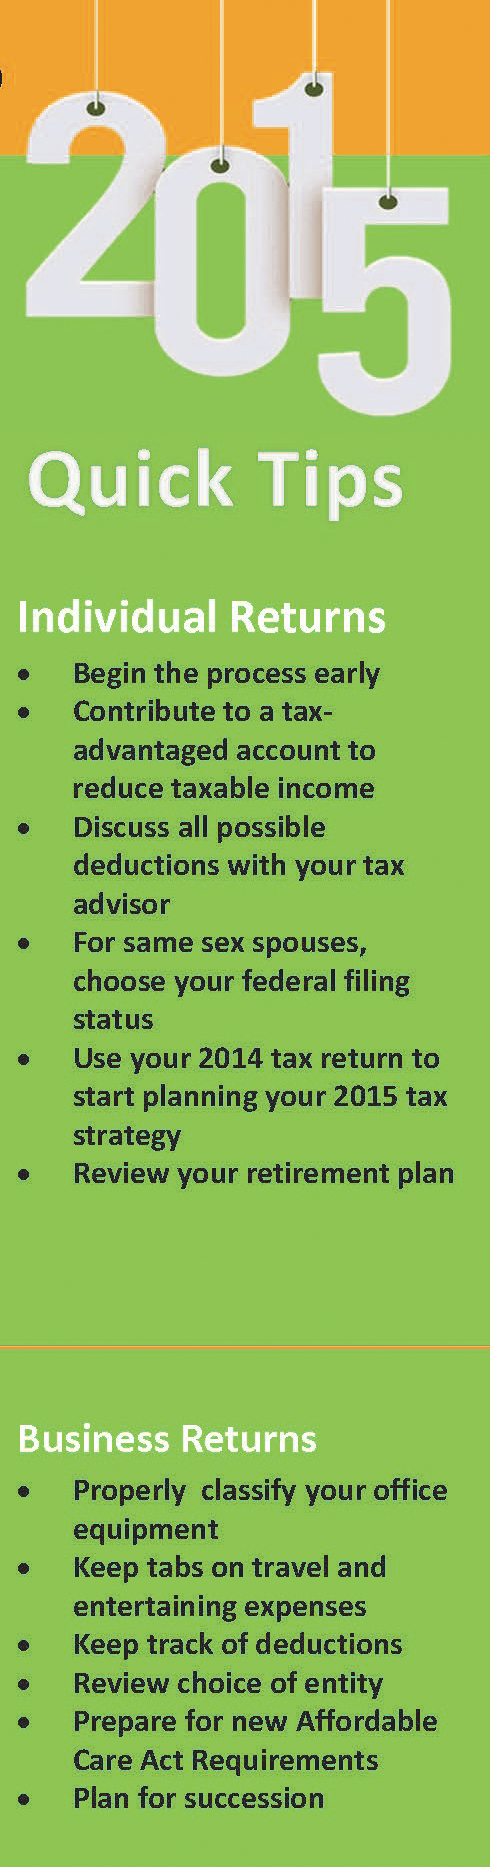 Quick Tax Tips for the 2015 Filing Season